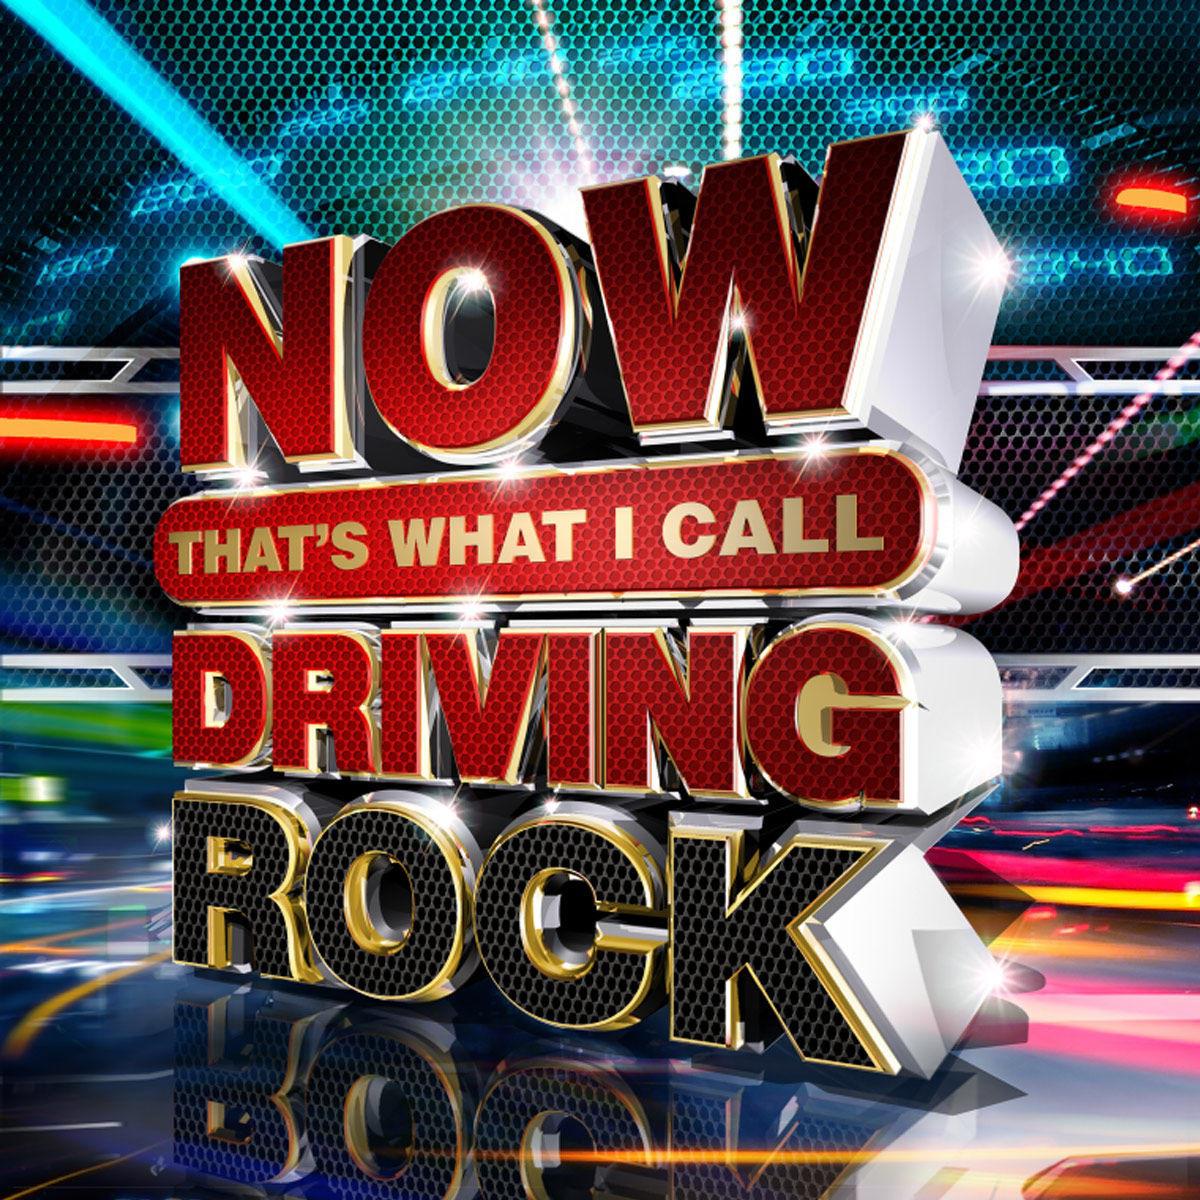 Now Thats What I Call Driving Rock